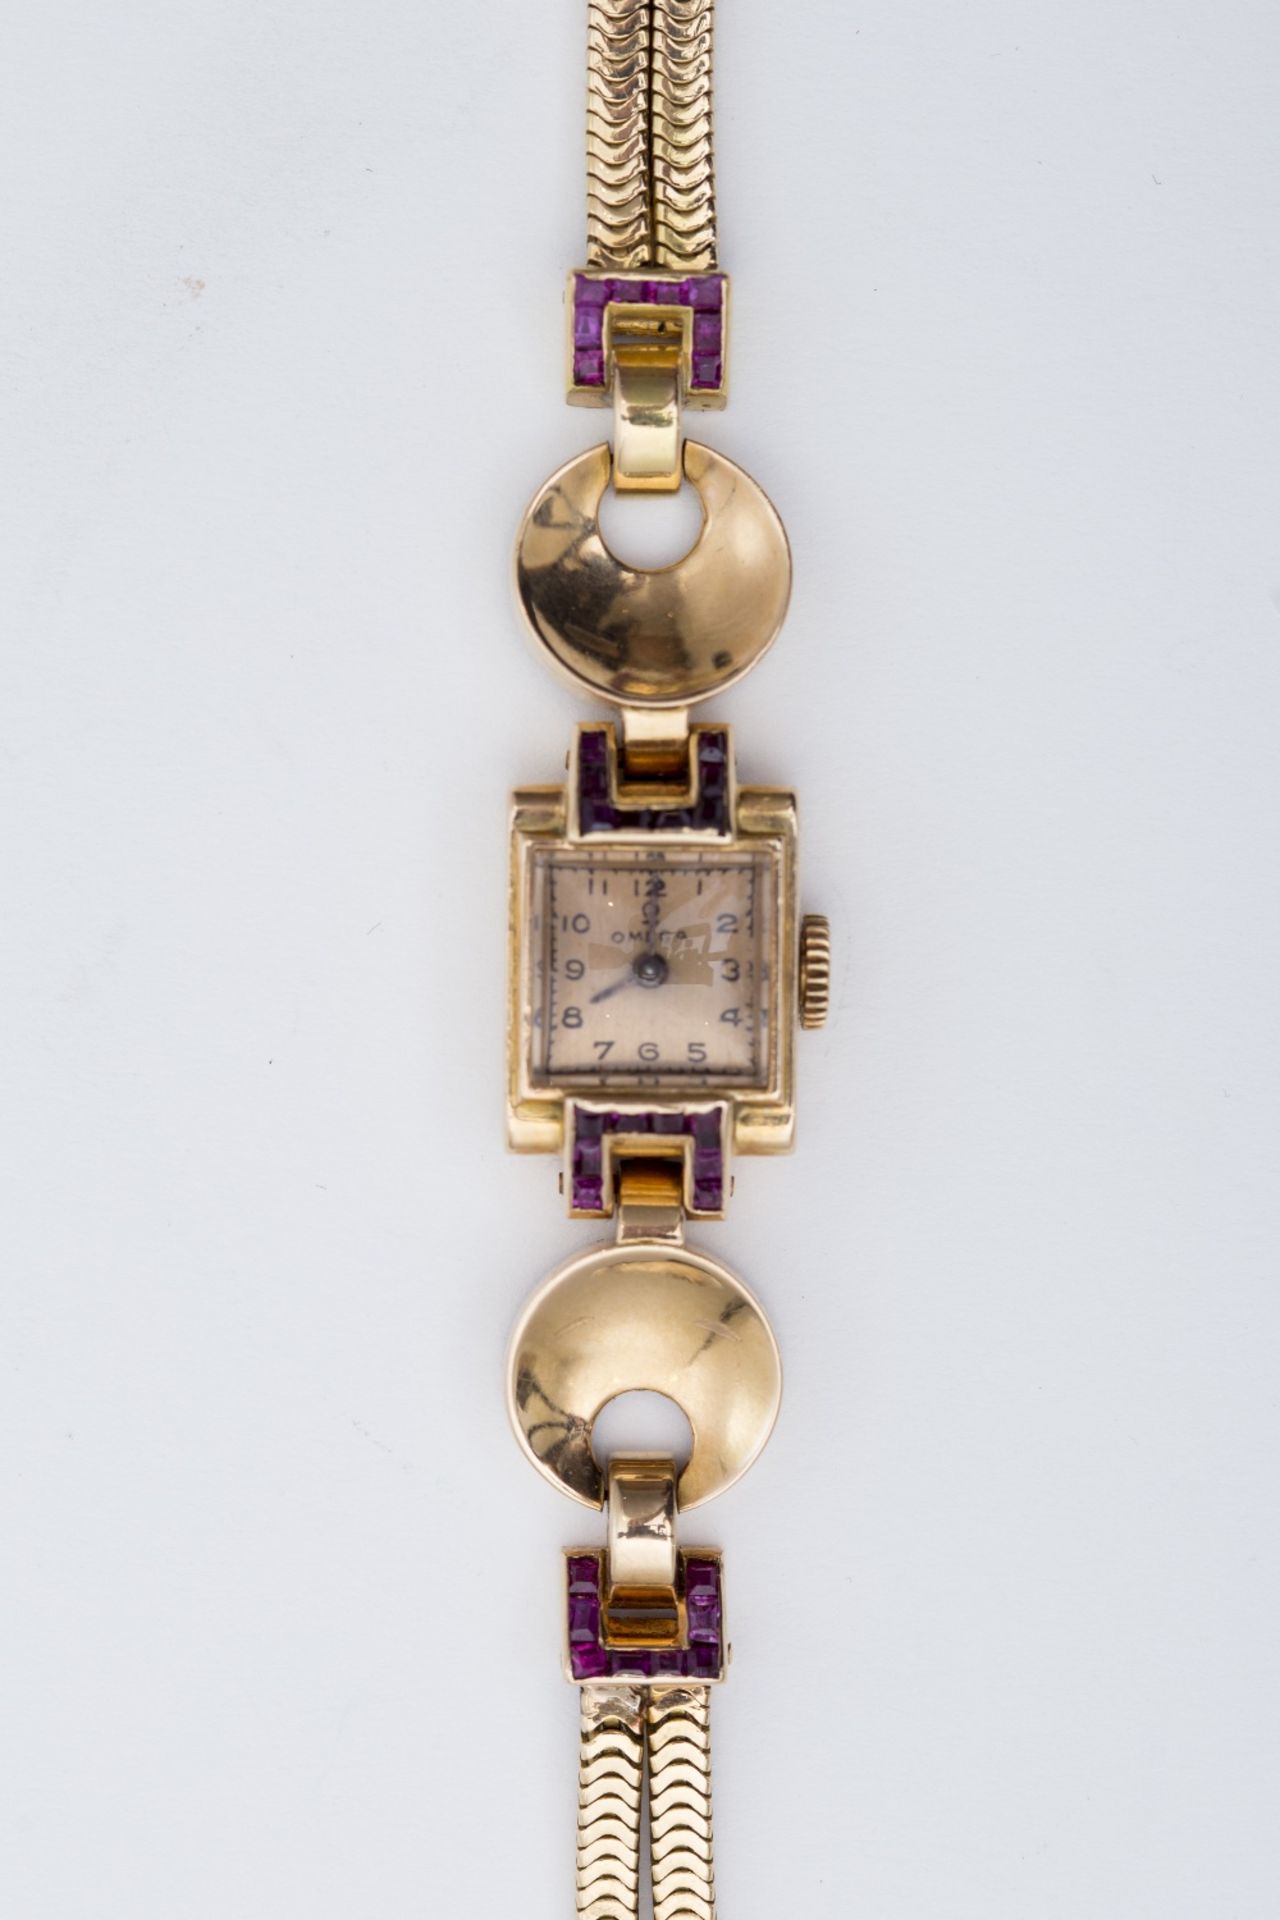 Omega Lady's 1950's watch: 18 kt rose gold, adorned with two asymmetrical disks, set with small